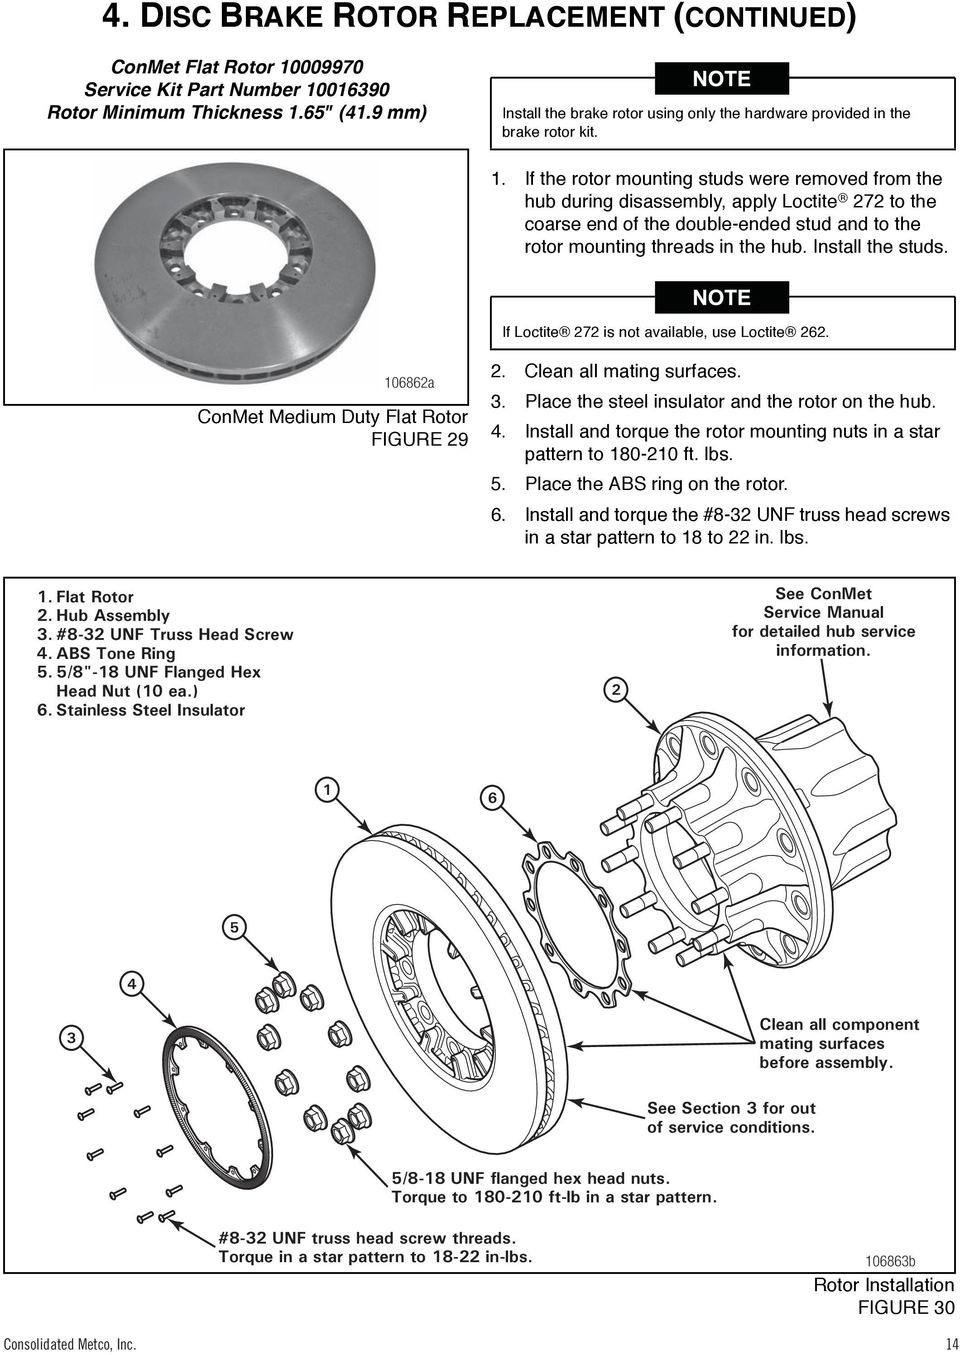 If the rotor mounting studs were removed from the hub during disassembly, apply Loctite 272 to the coarse end of the double-ended stud and to the rotor mounting threads in the hub. Install the studs.